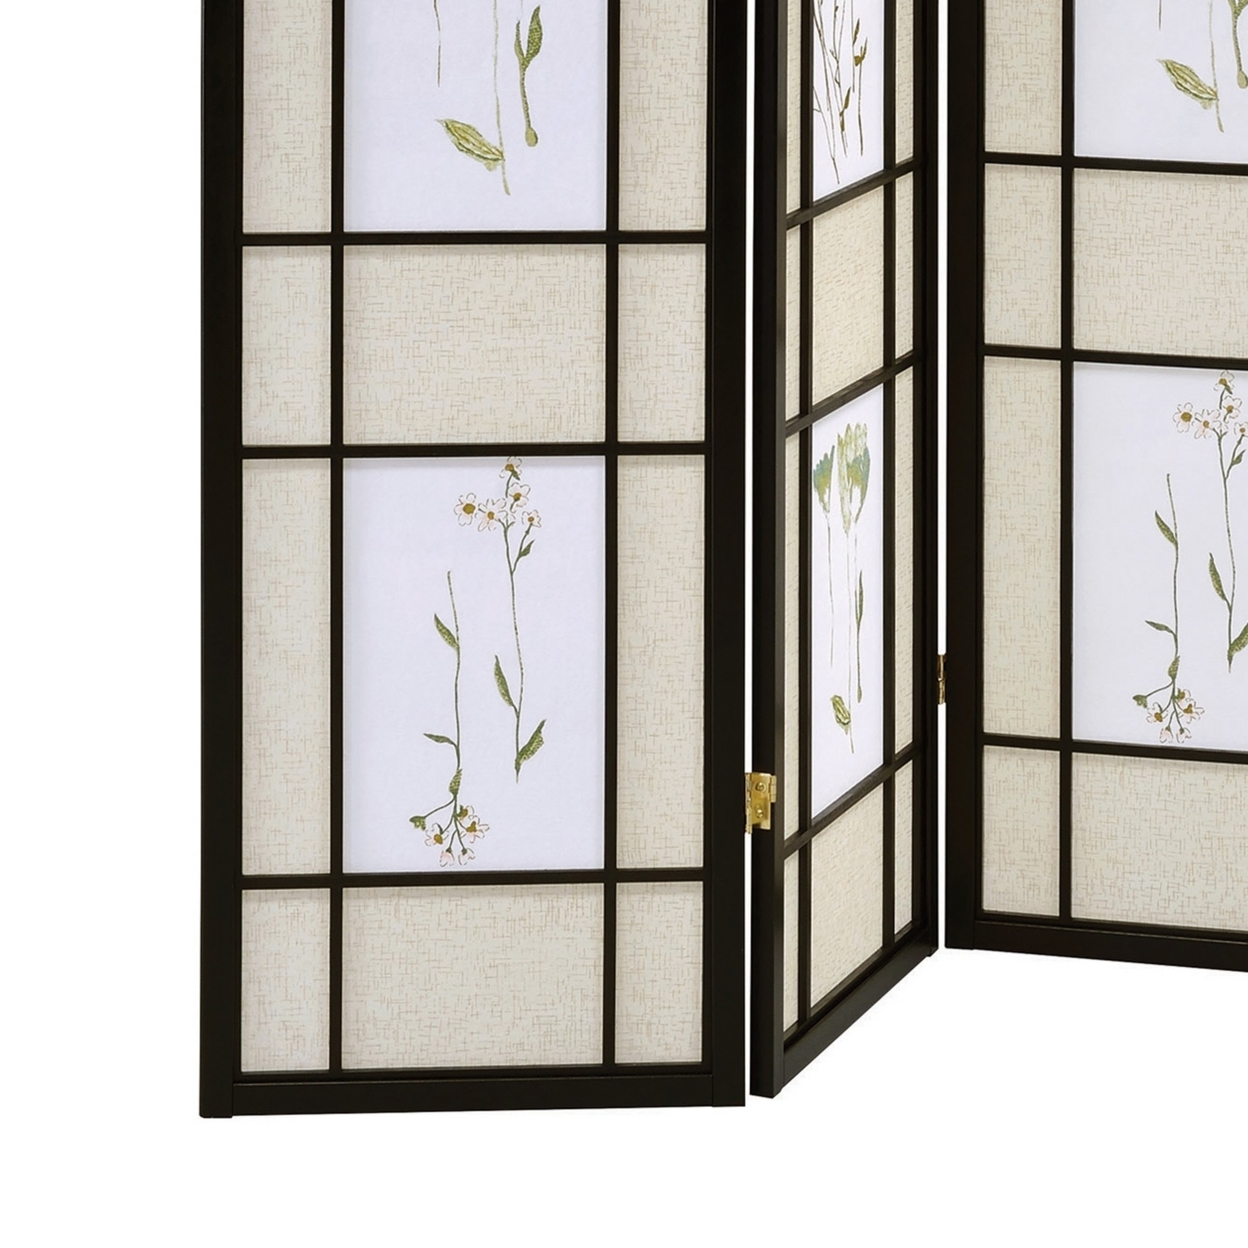 4 Panel Screen With Floral Print Detailing And Wooden Frame, Black- Saltoro Sherpi